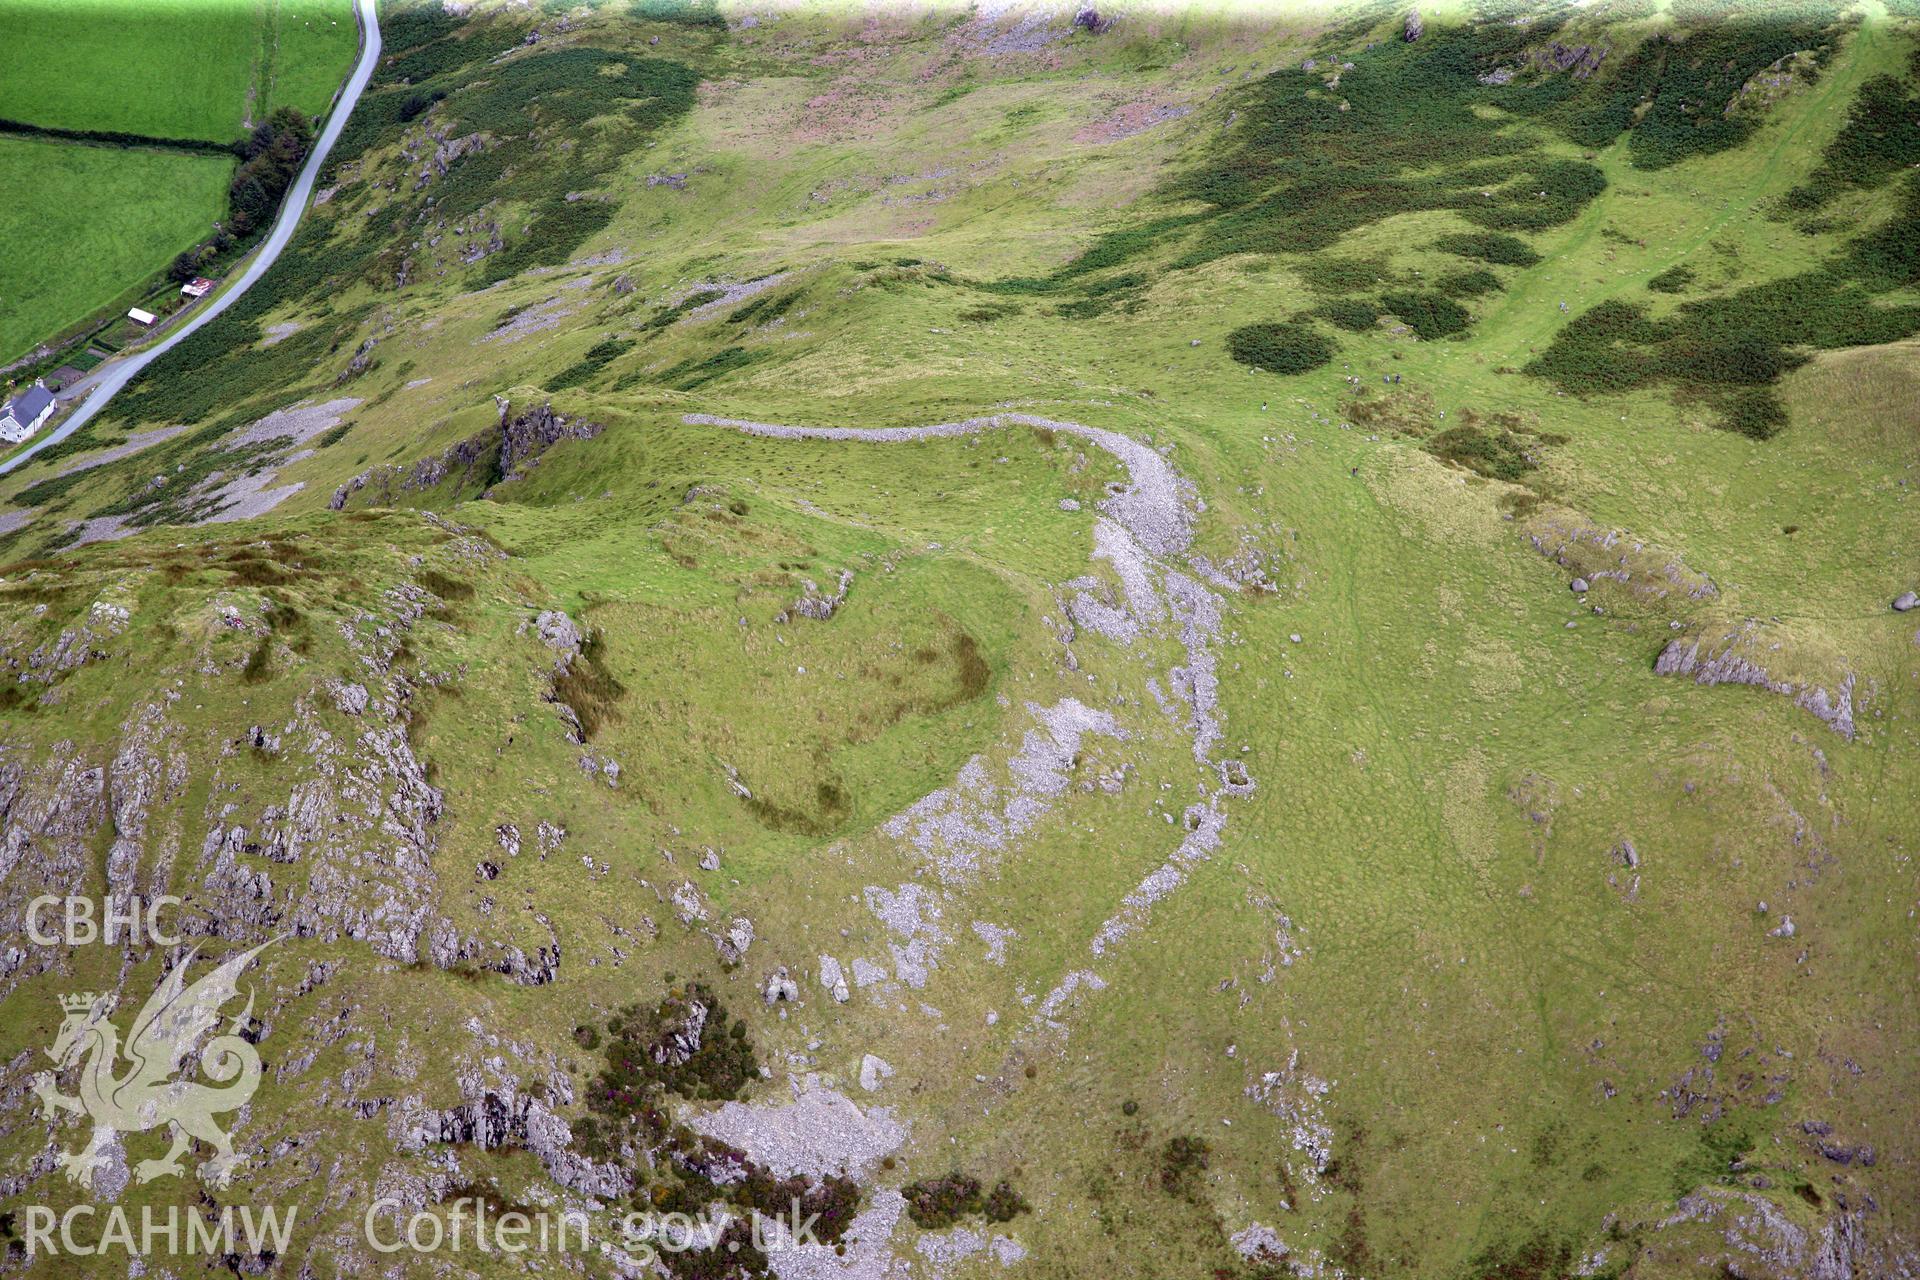 RCAHMW colour oblique photograph of Craig-y-aderyn Hillfort. Taken by Toby Driver on 17/08/2011.